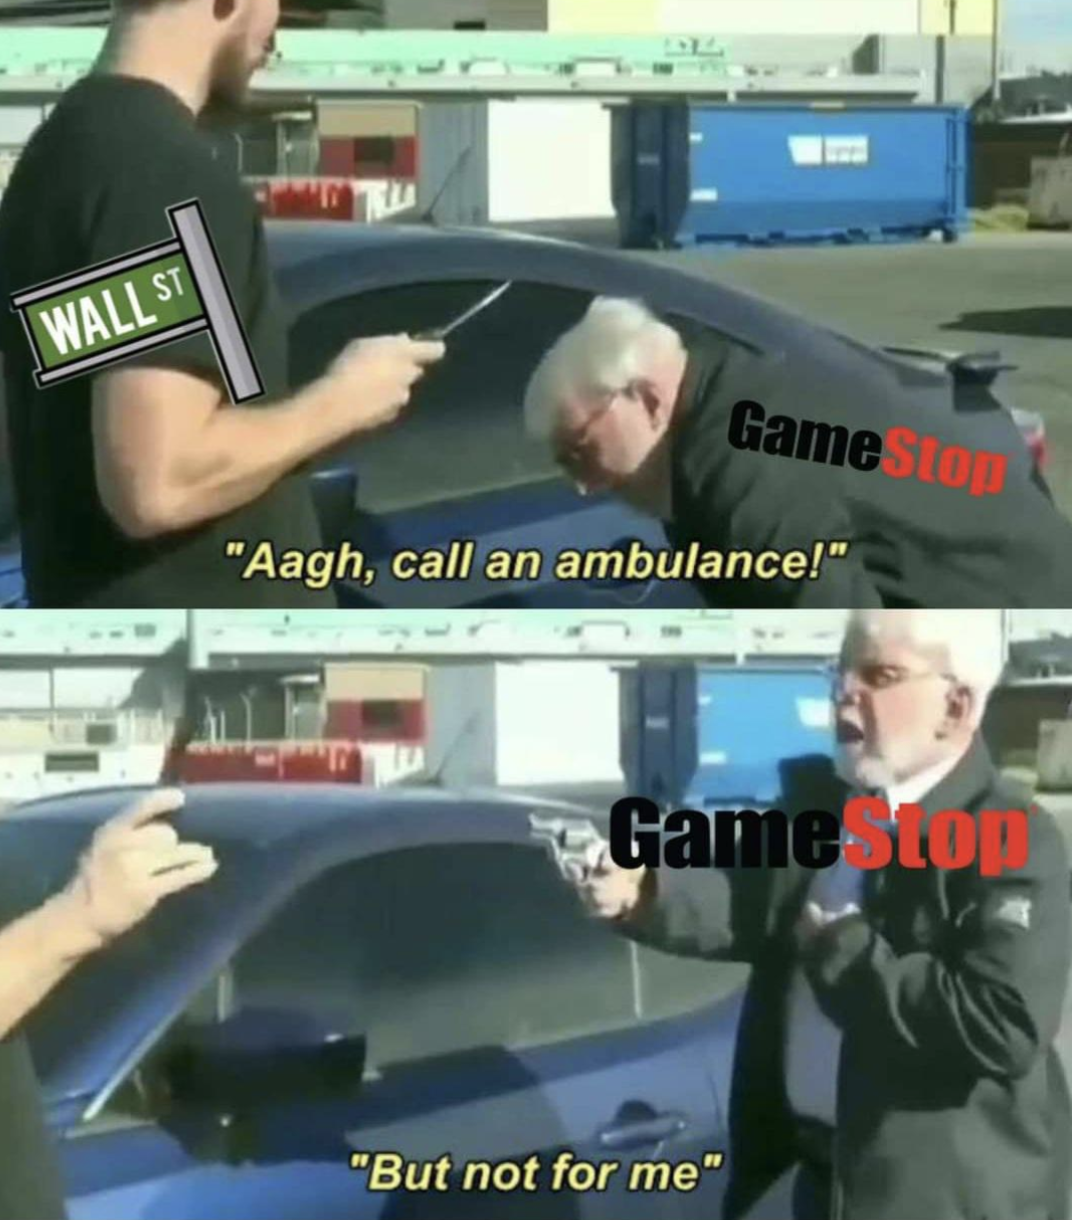 call for ambulance but not for me - Wall St GameStop "Aagh, call an ambulance!" GameStop "But not for me"